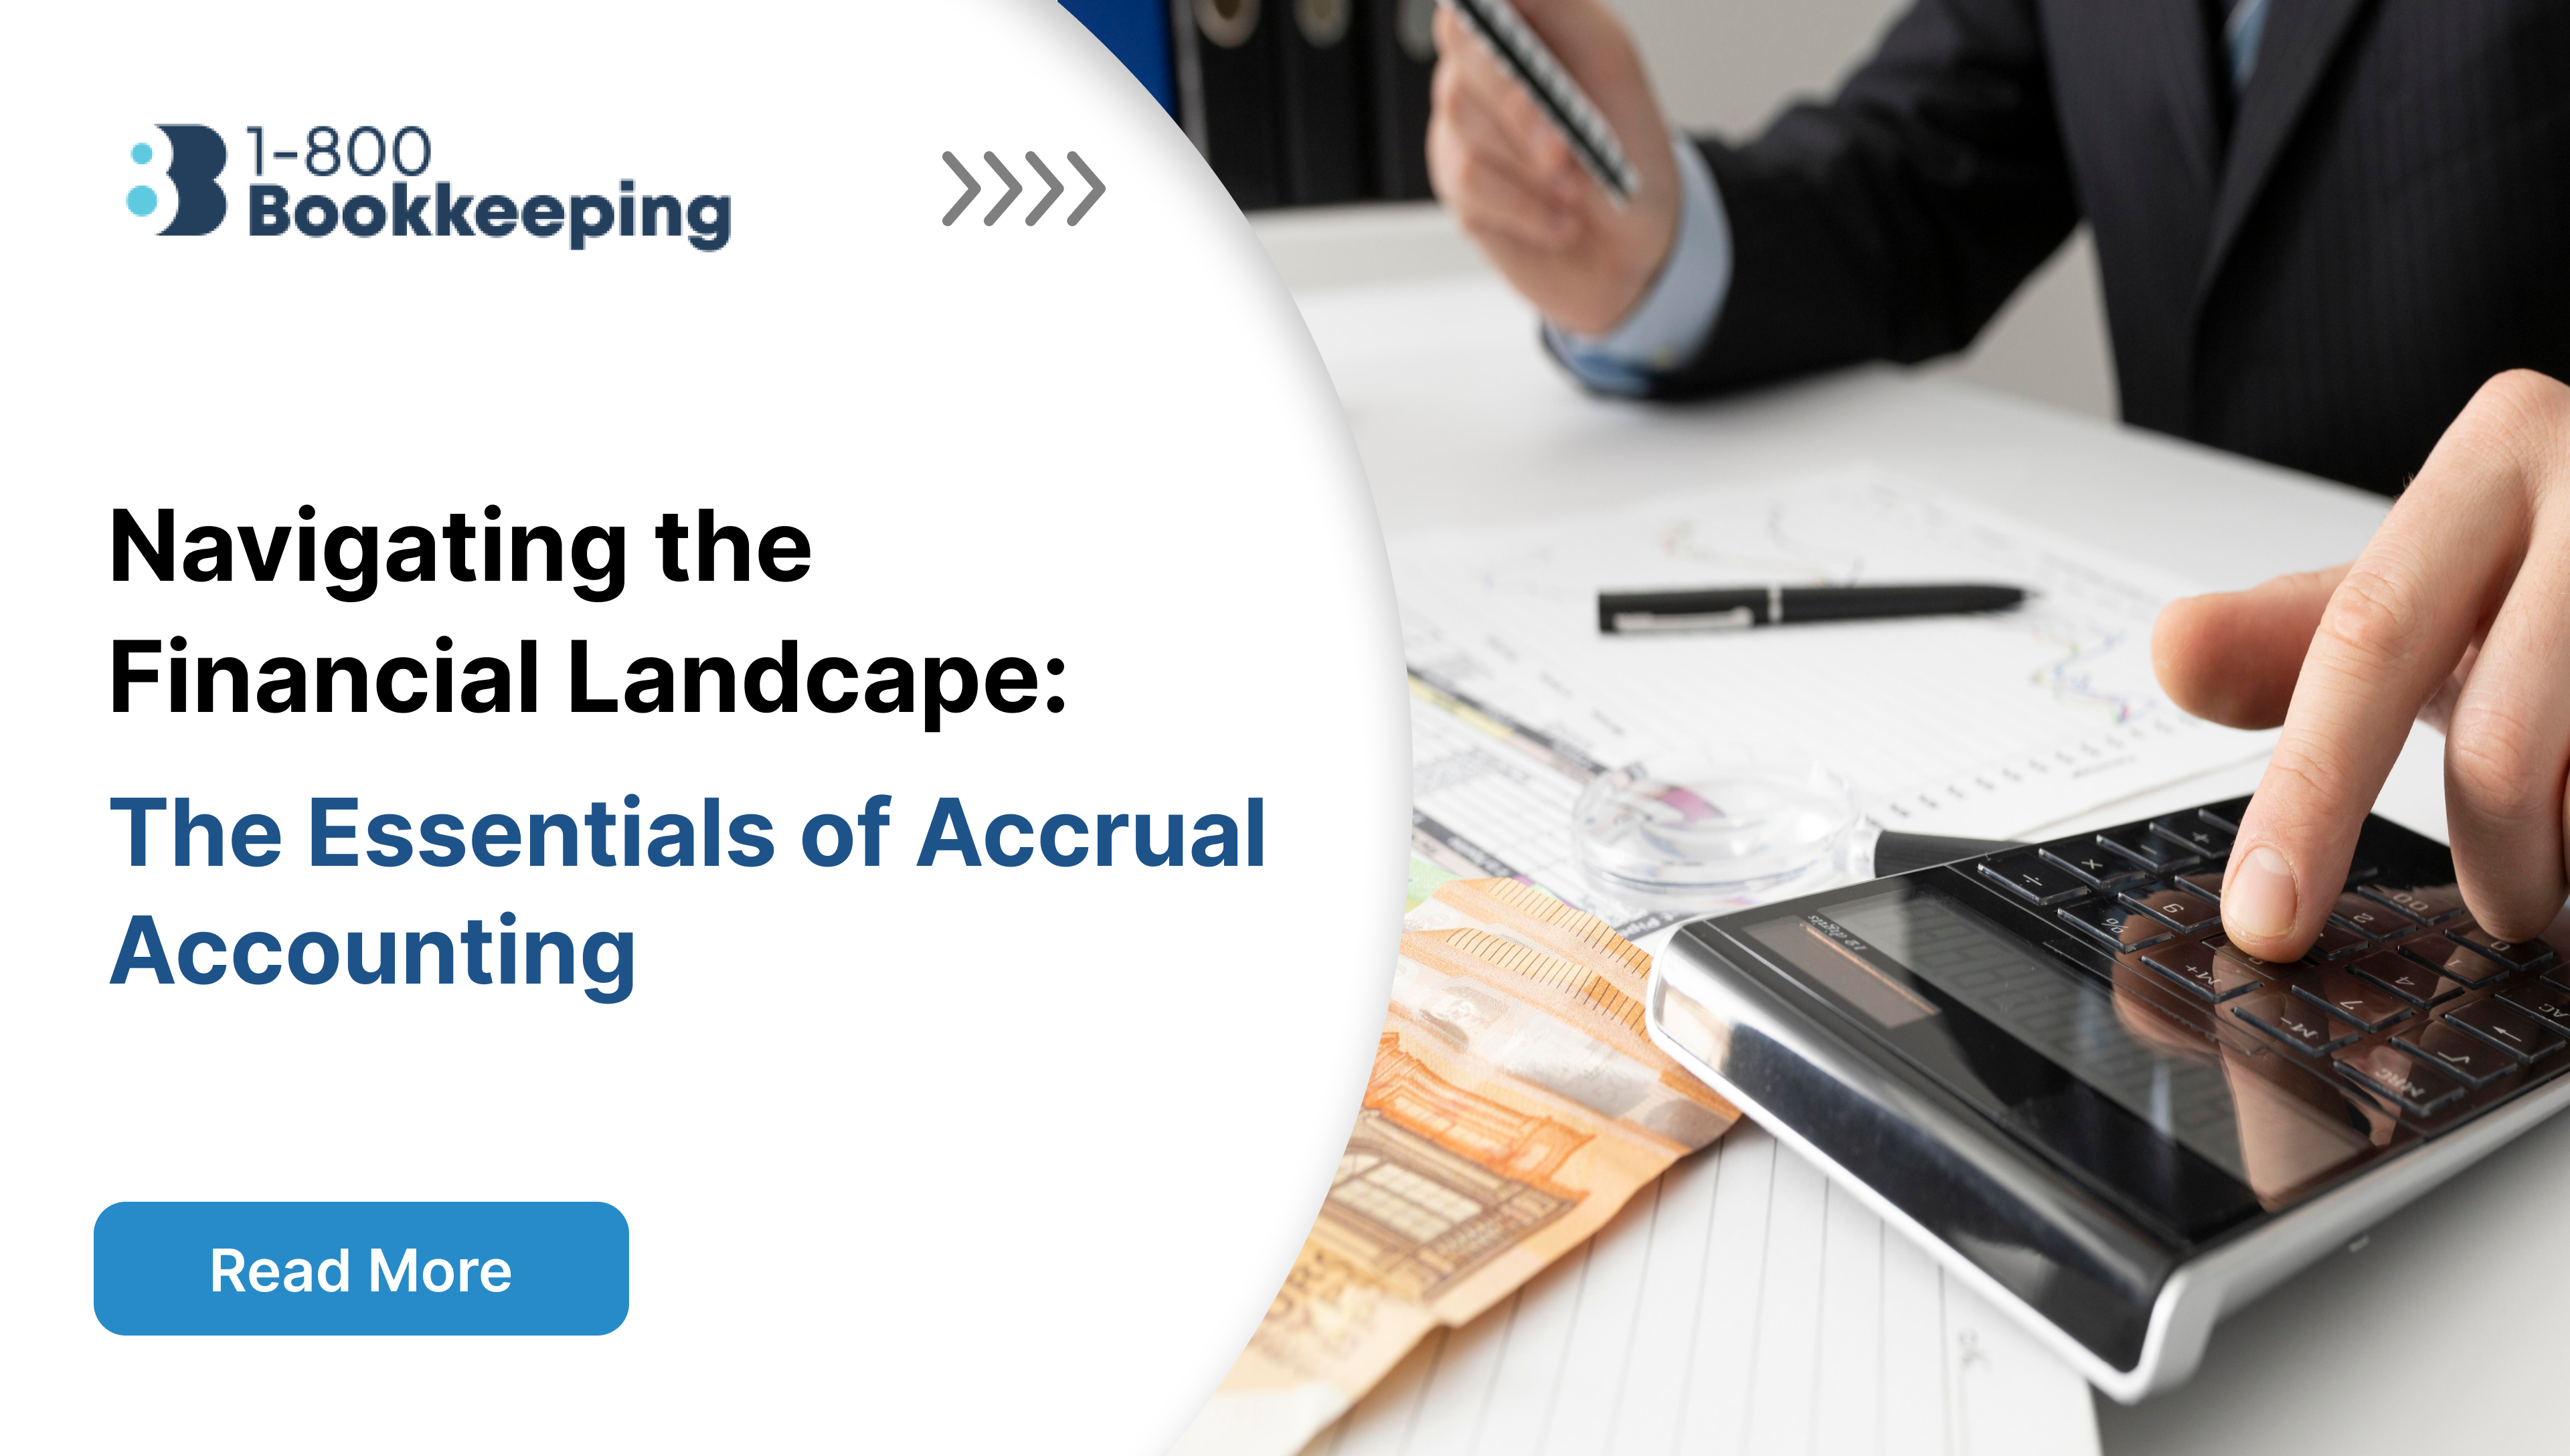 Navigating the Financial Landscape: The Essentials of Accrual Accounting